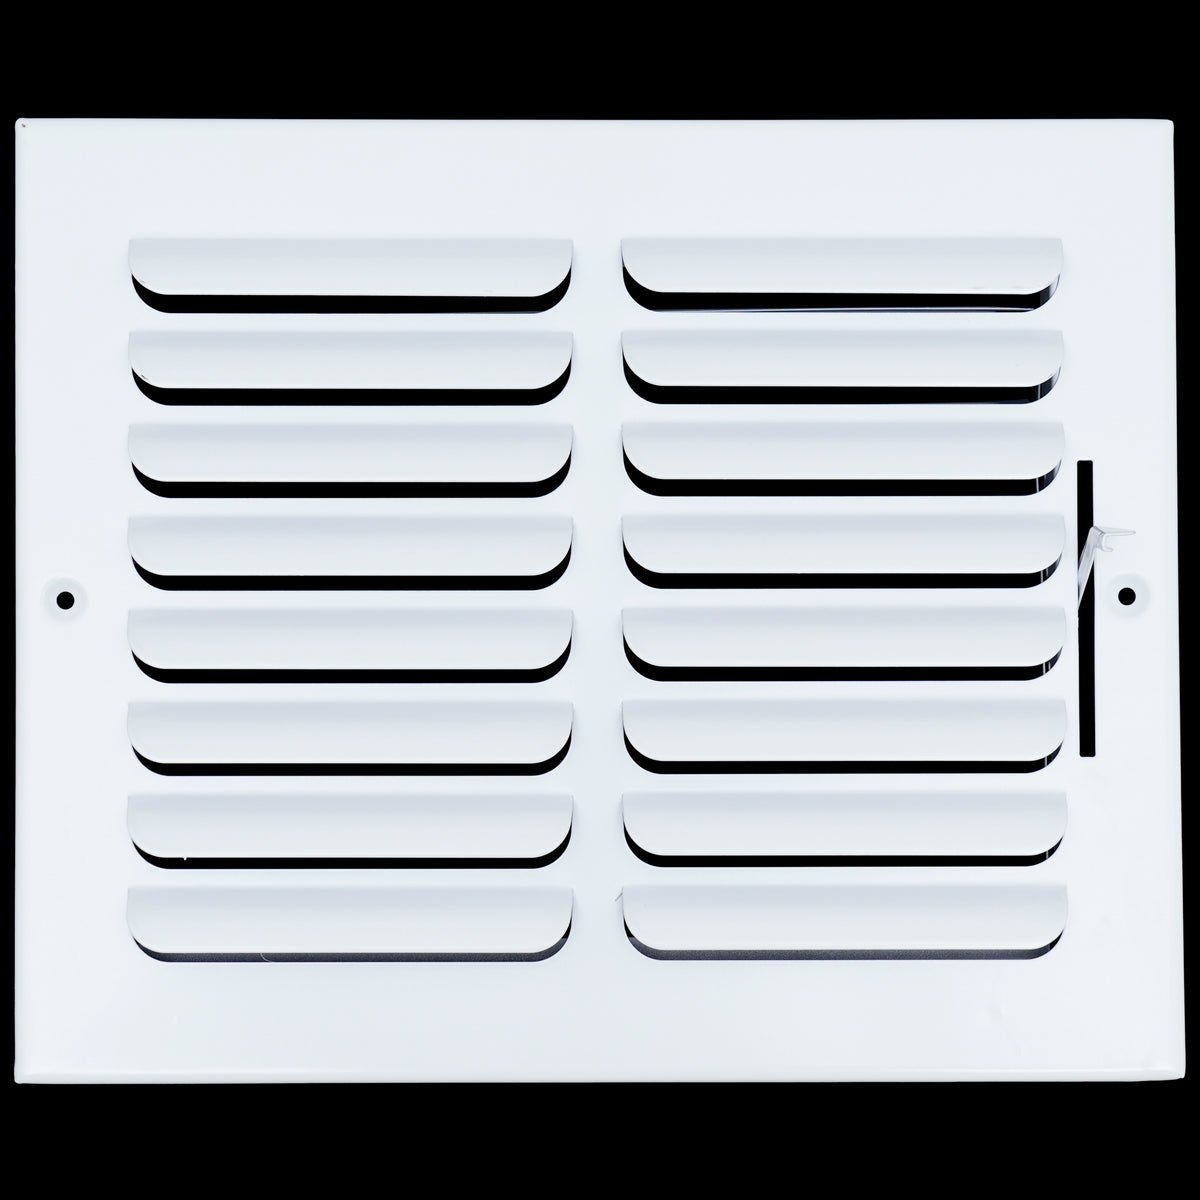 airgrilles 10"w x 8"h 1 way fixed curved blade air supply diffuser  -  register vent cover grill for sidewall and ceiling  -  white  -  outer dimensions: 11.75"w x 9.75"h hnd-cb-wh-1way-10x8  - 1